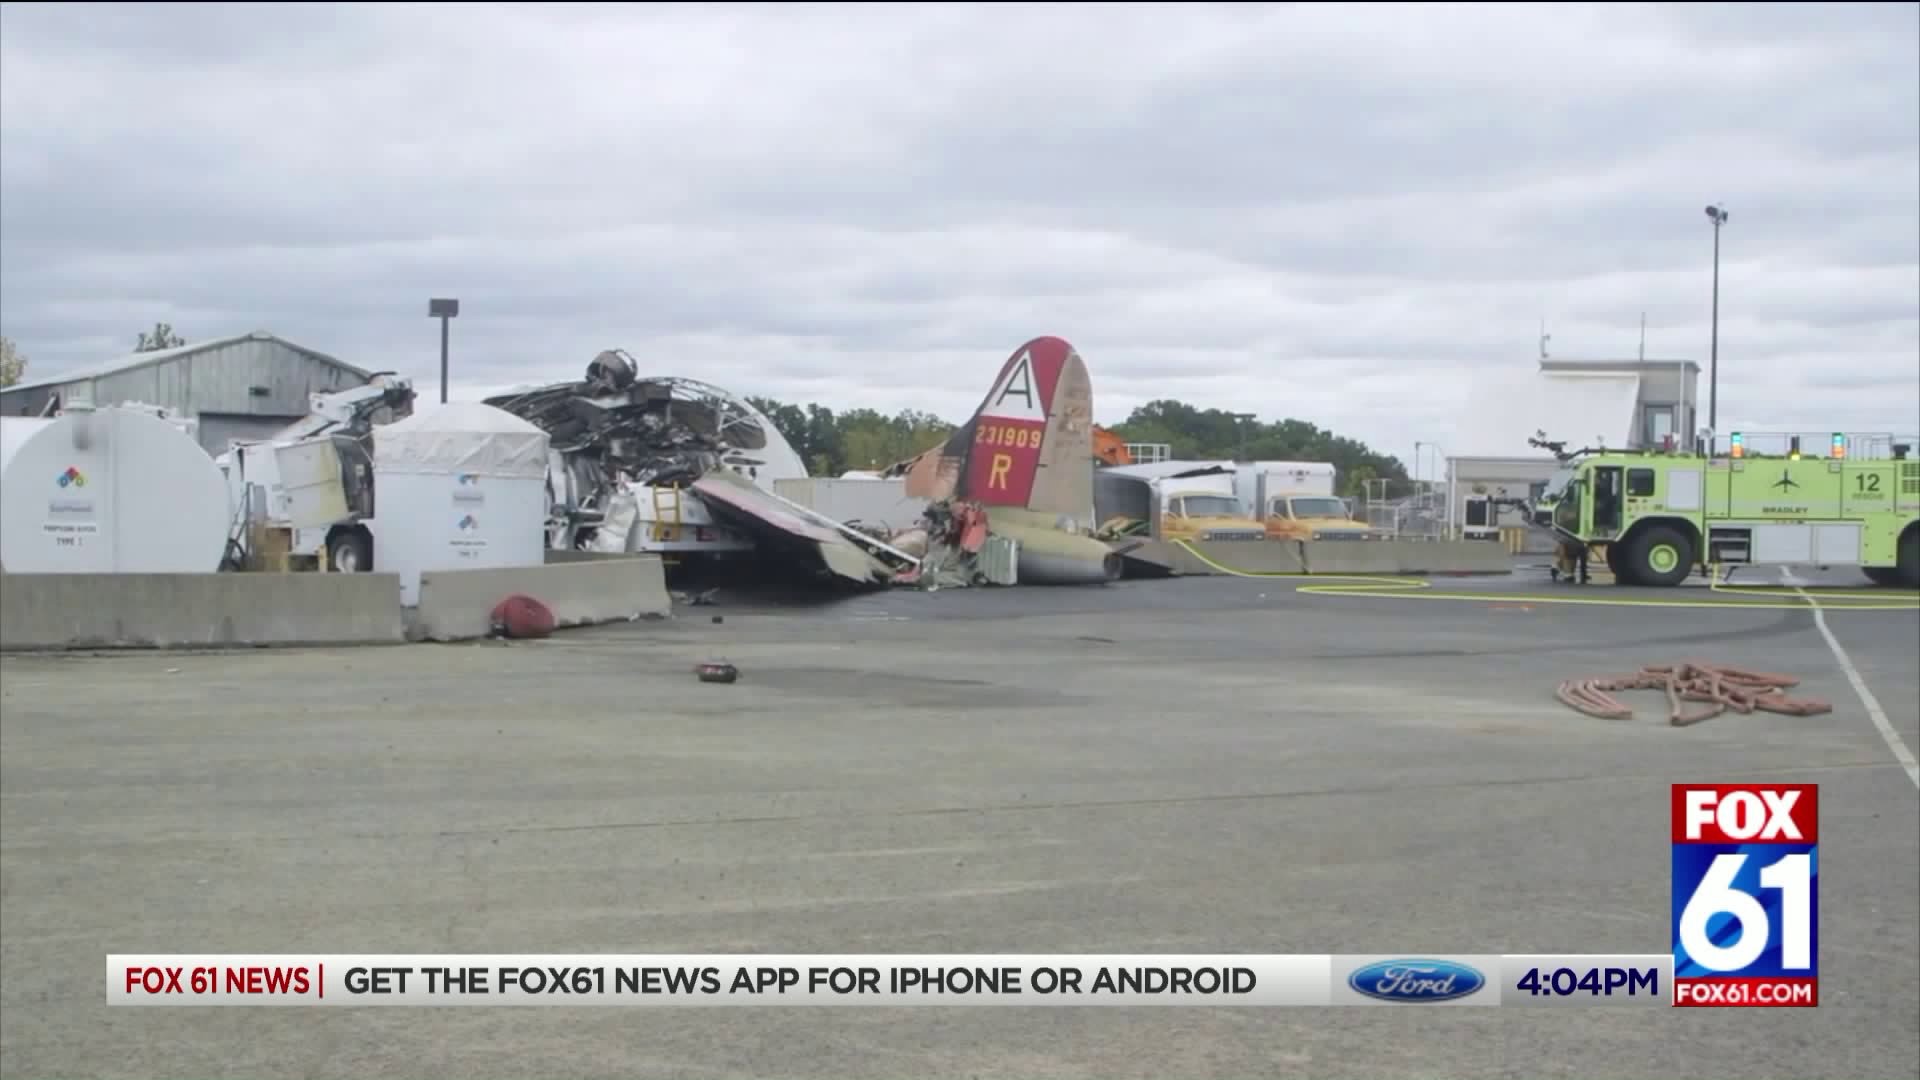 Senator Richard Blumenthal Calling On The FAA To Revamp Their Vintage Planes` Safety Regulations